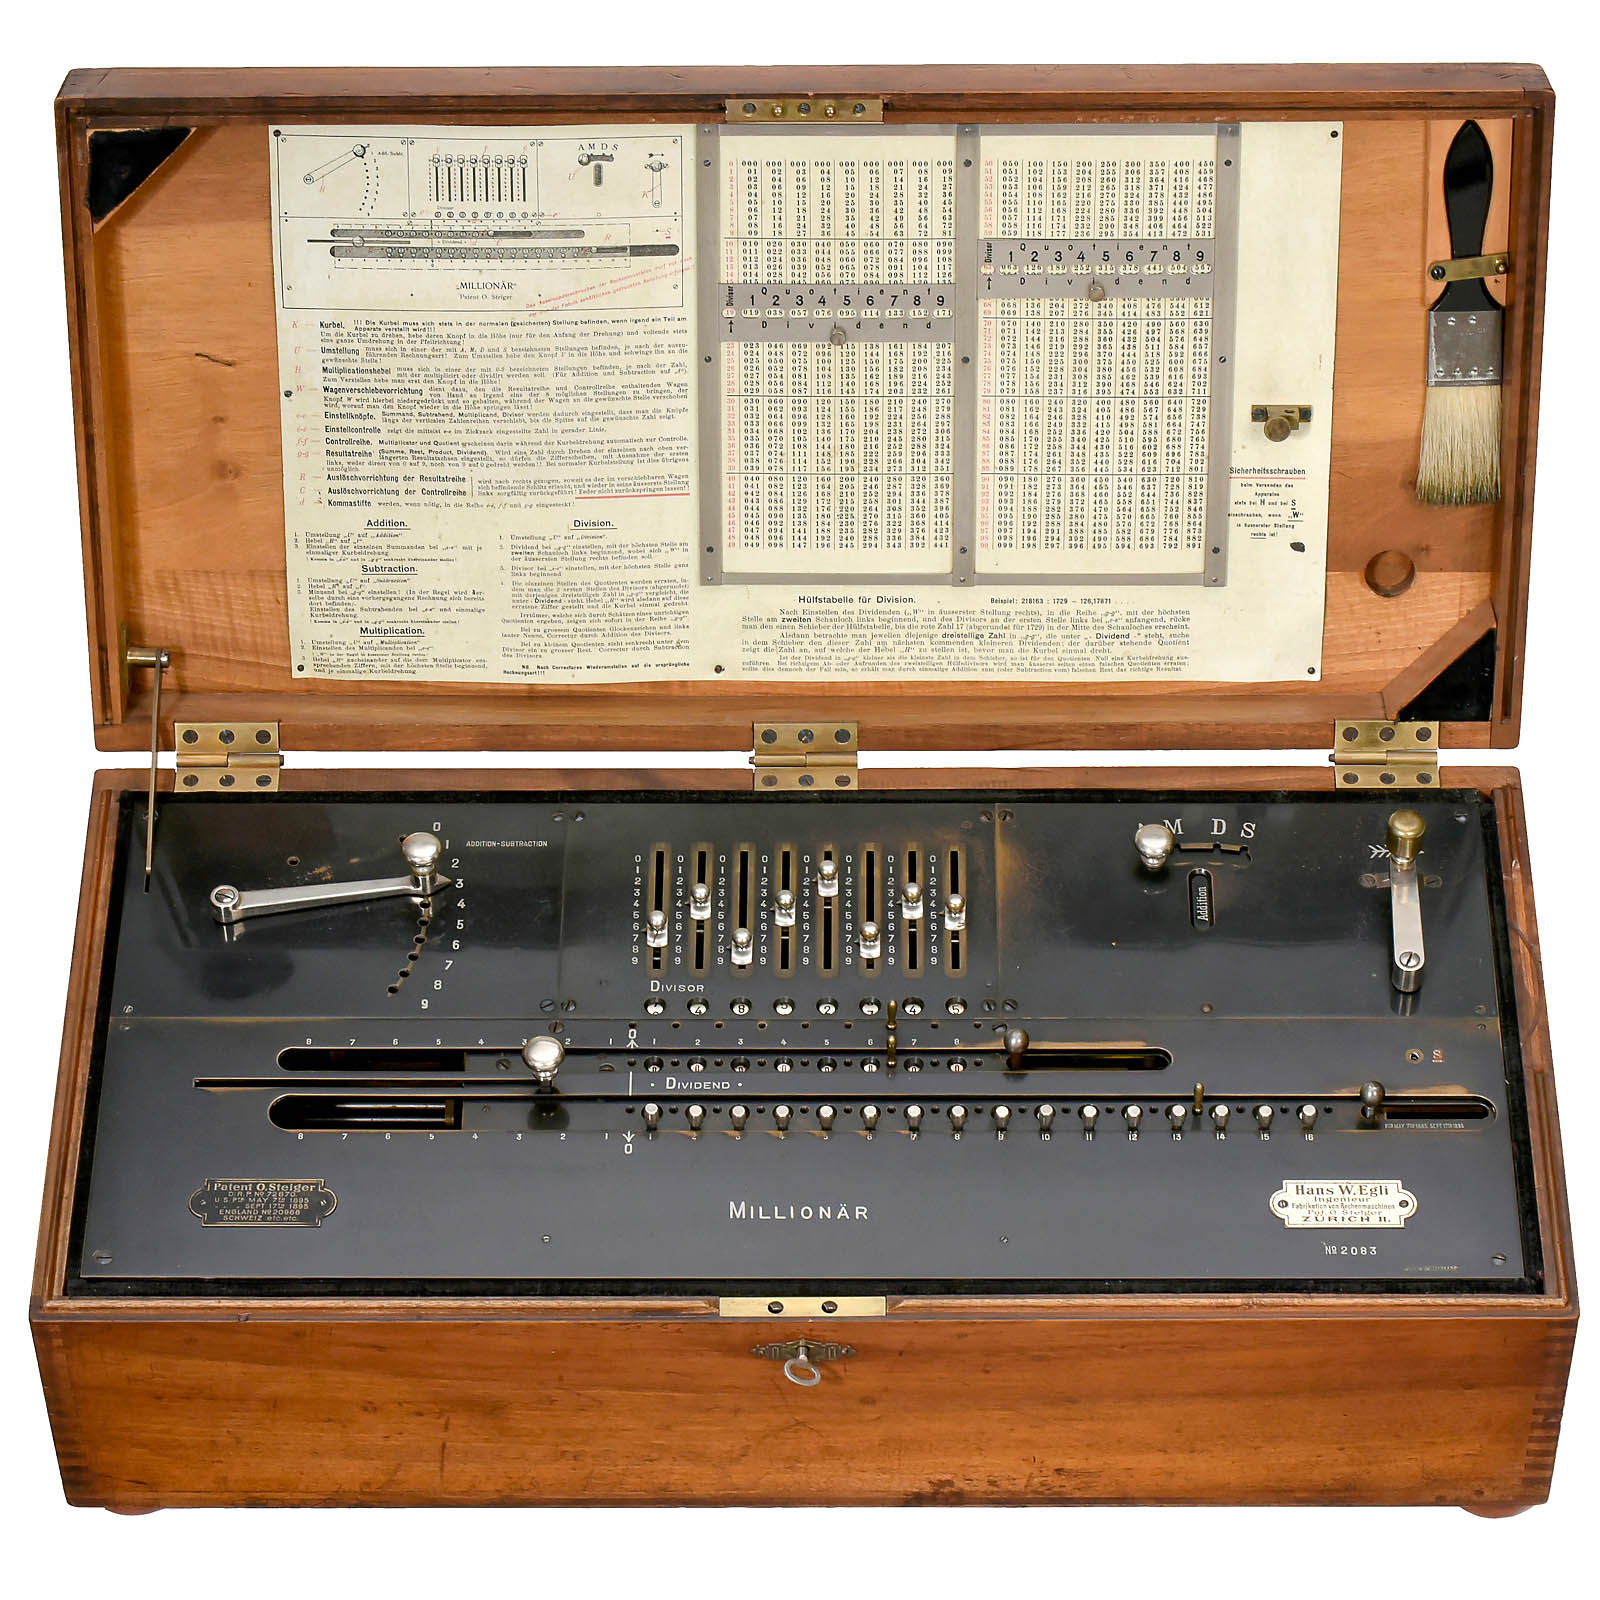 "Millionär" Calculator, 1895
Early model of the famous calculating machine, in original wooden case,